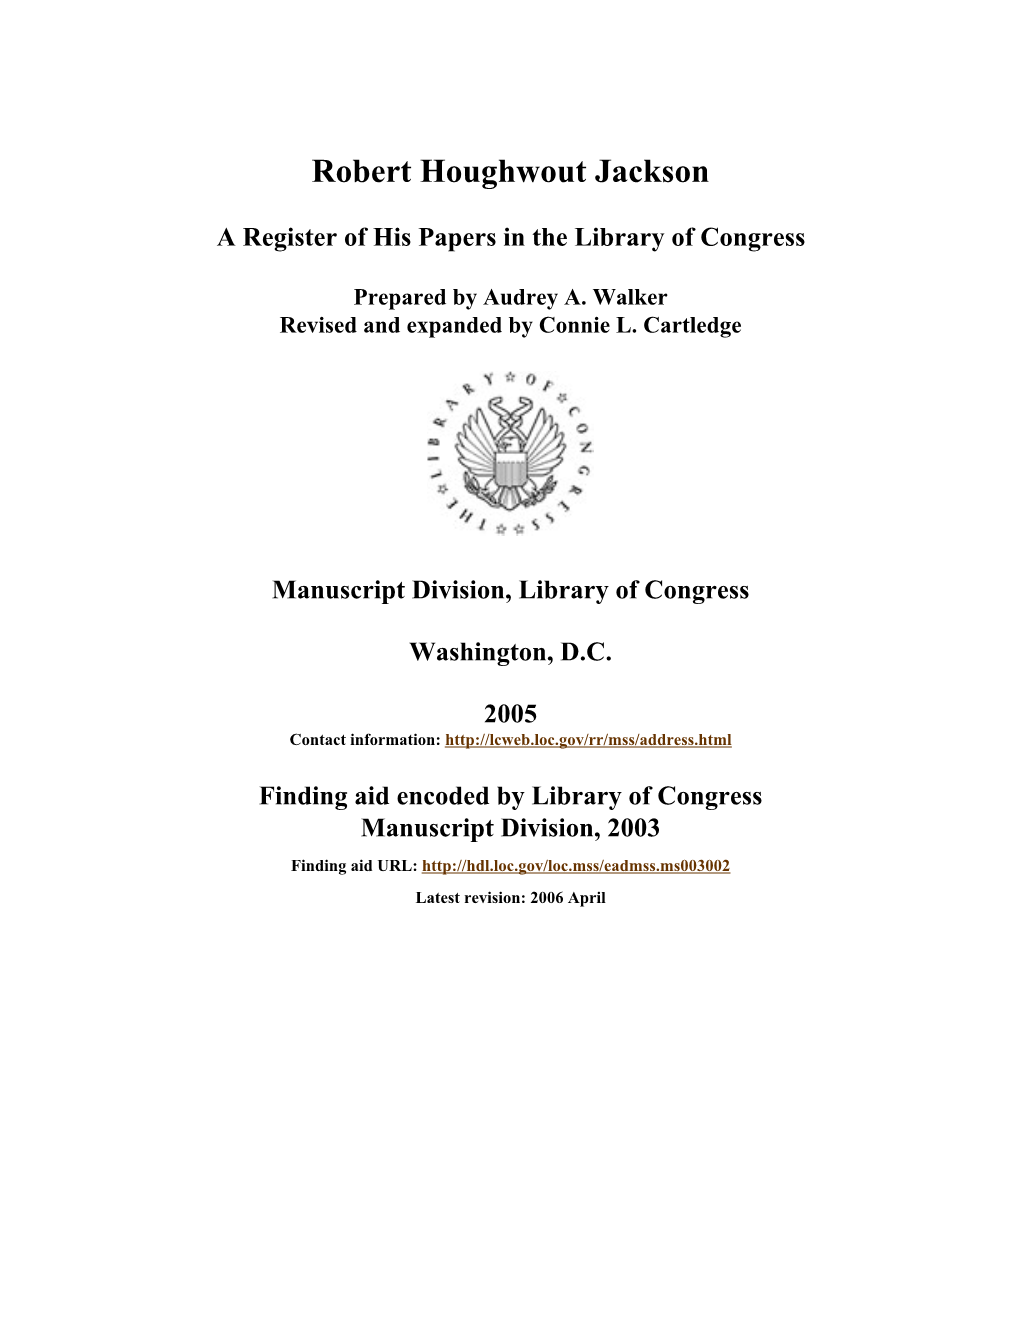 Papers of Robert Houghwout Jackson [Finding Aid]. Library of Congress